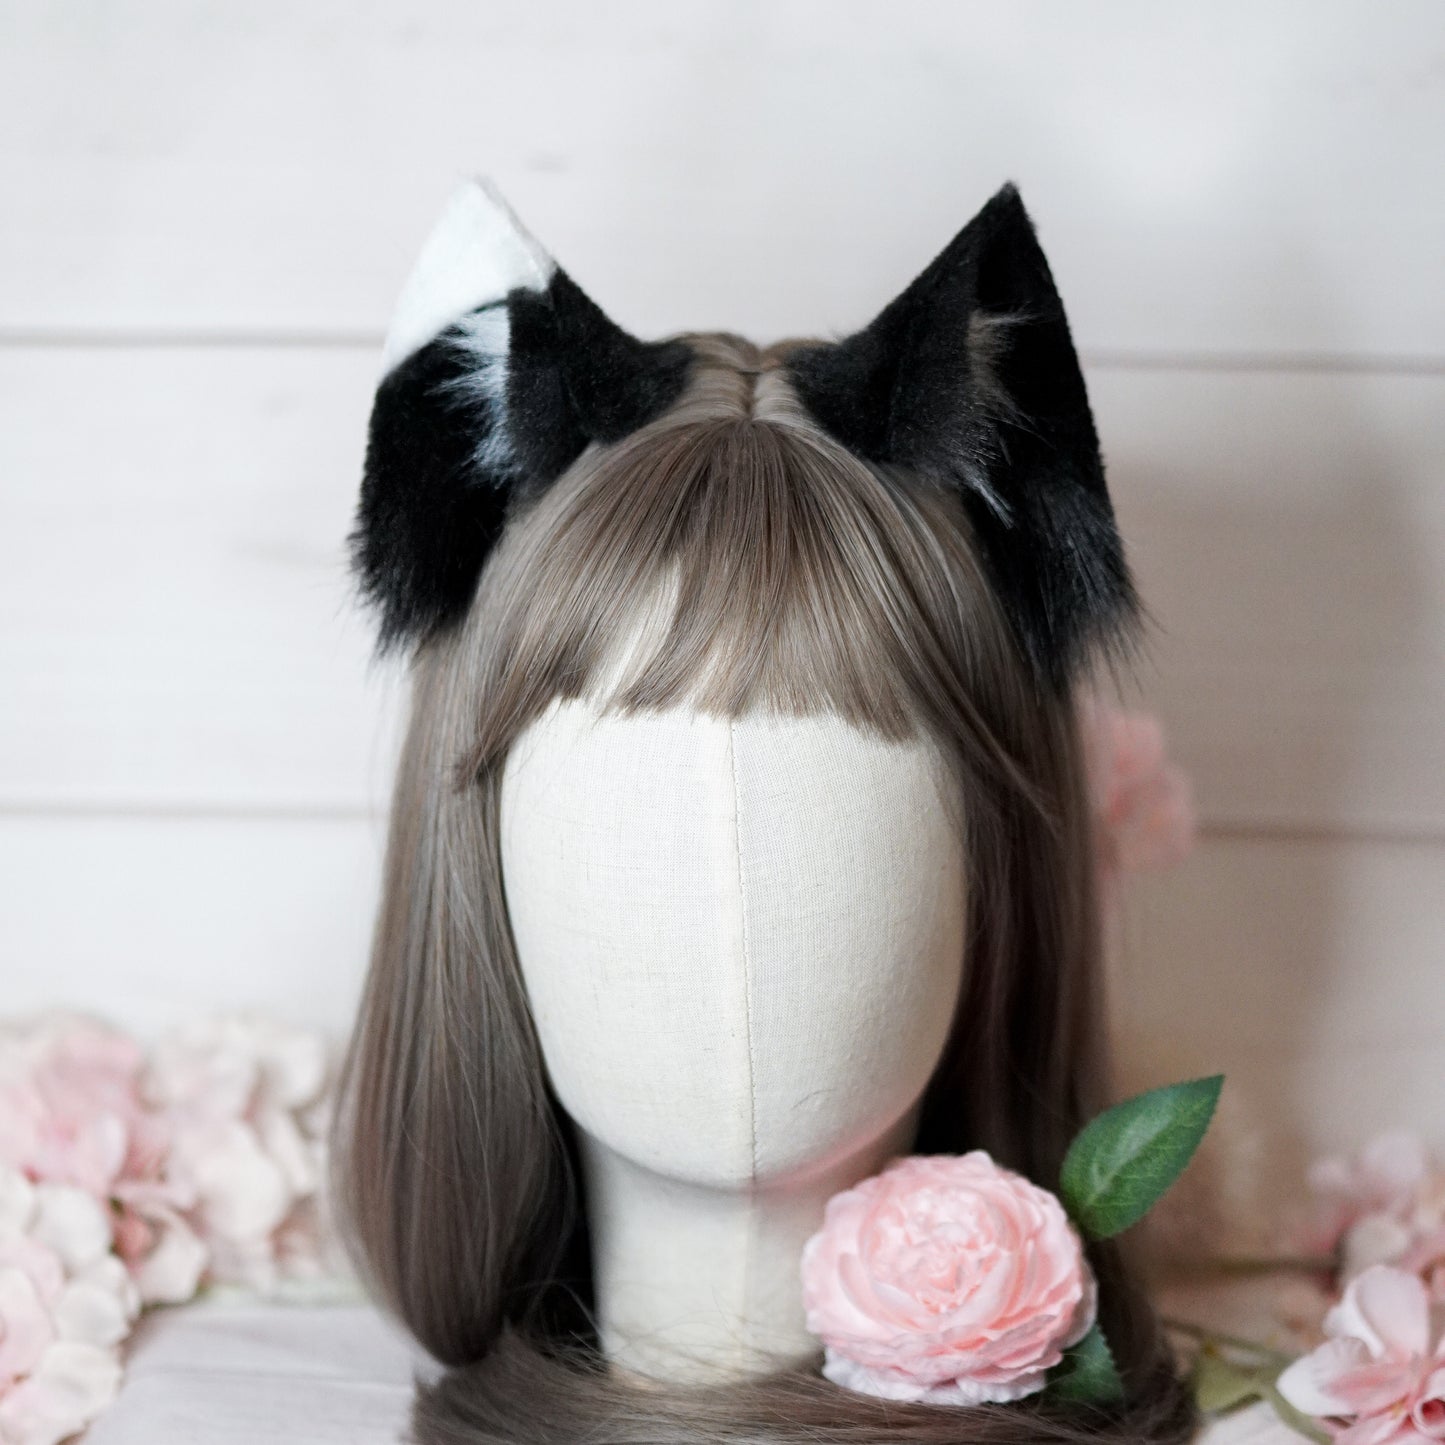 Izutsumi delicious in dungeon Cosplay Ears in black white